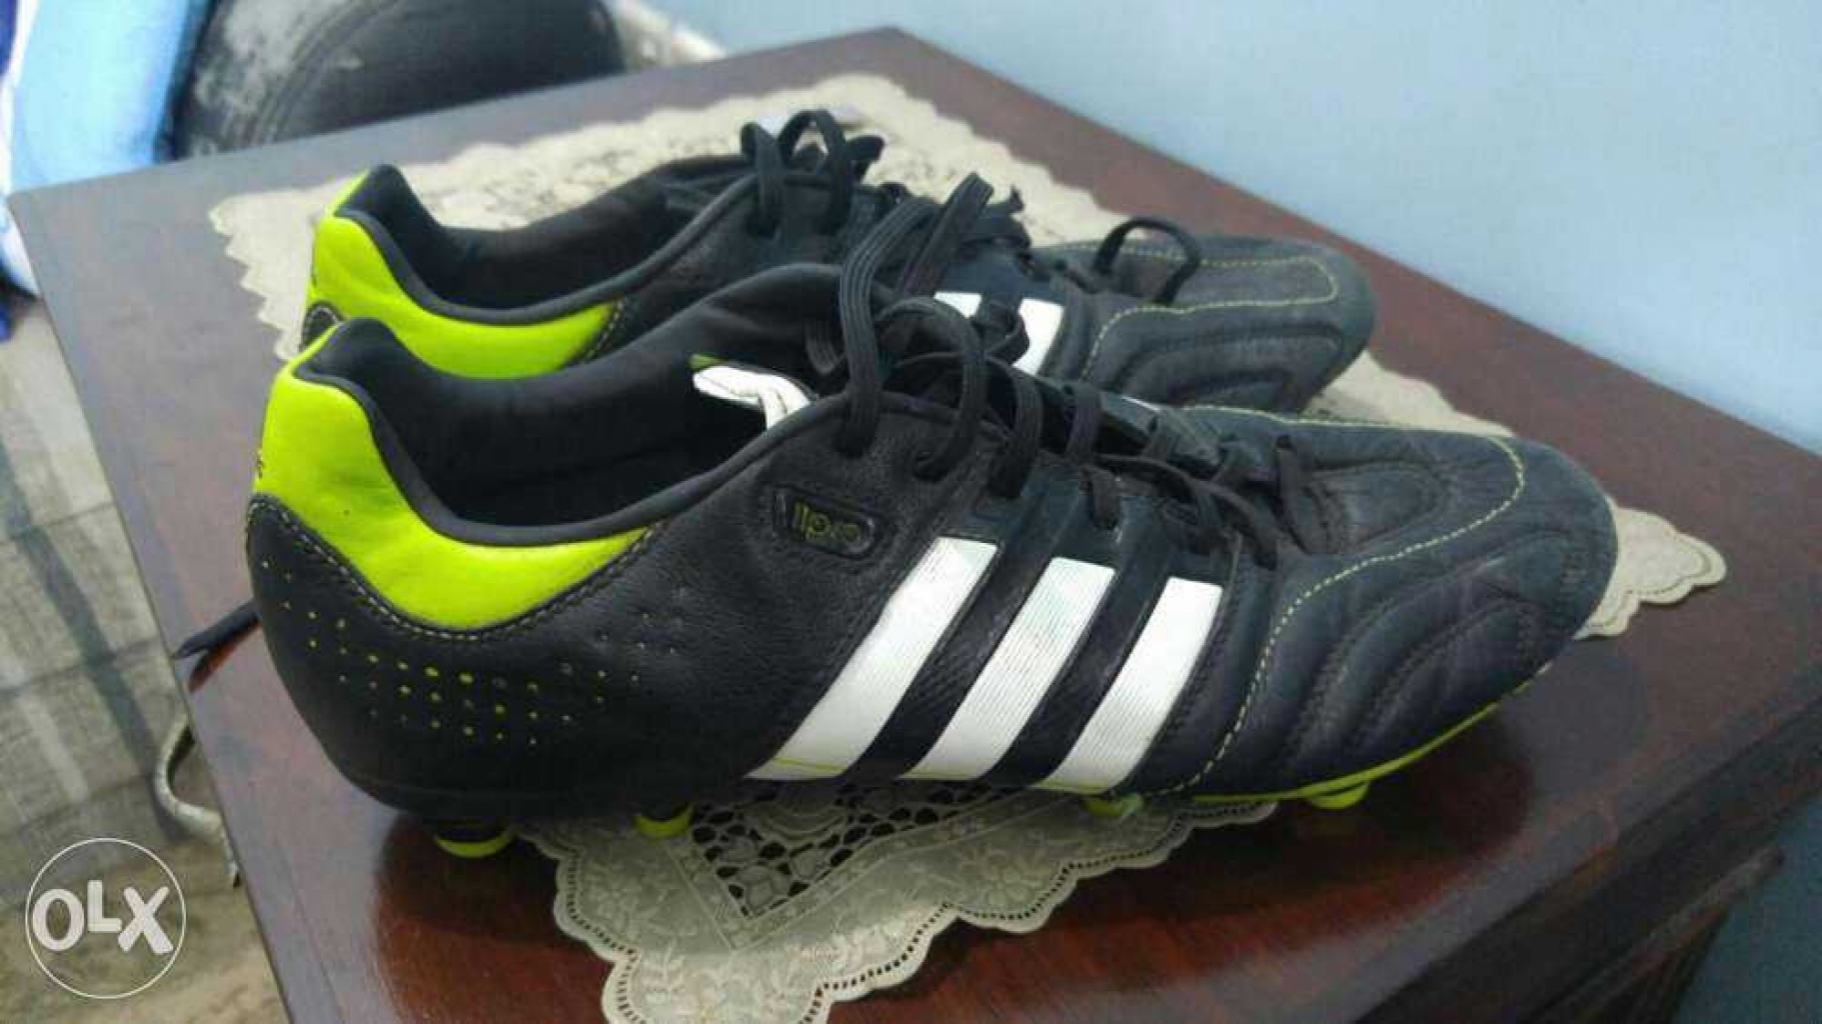 adidas football shoes in pakistan